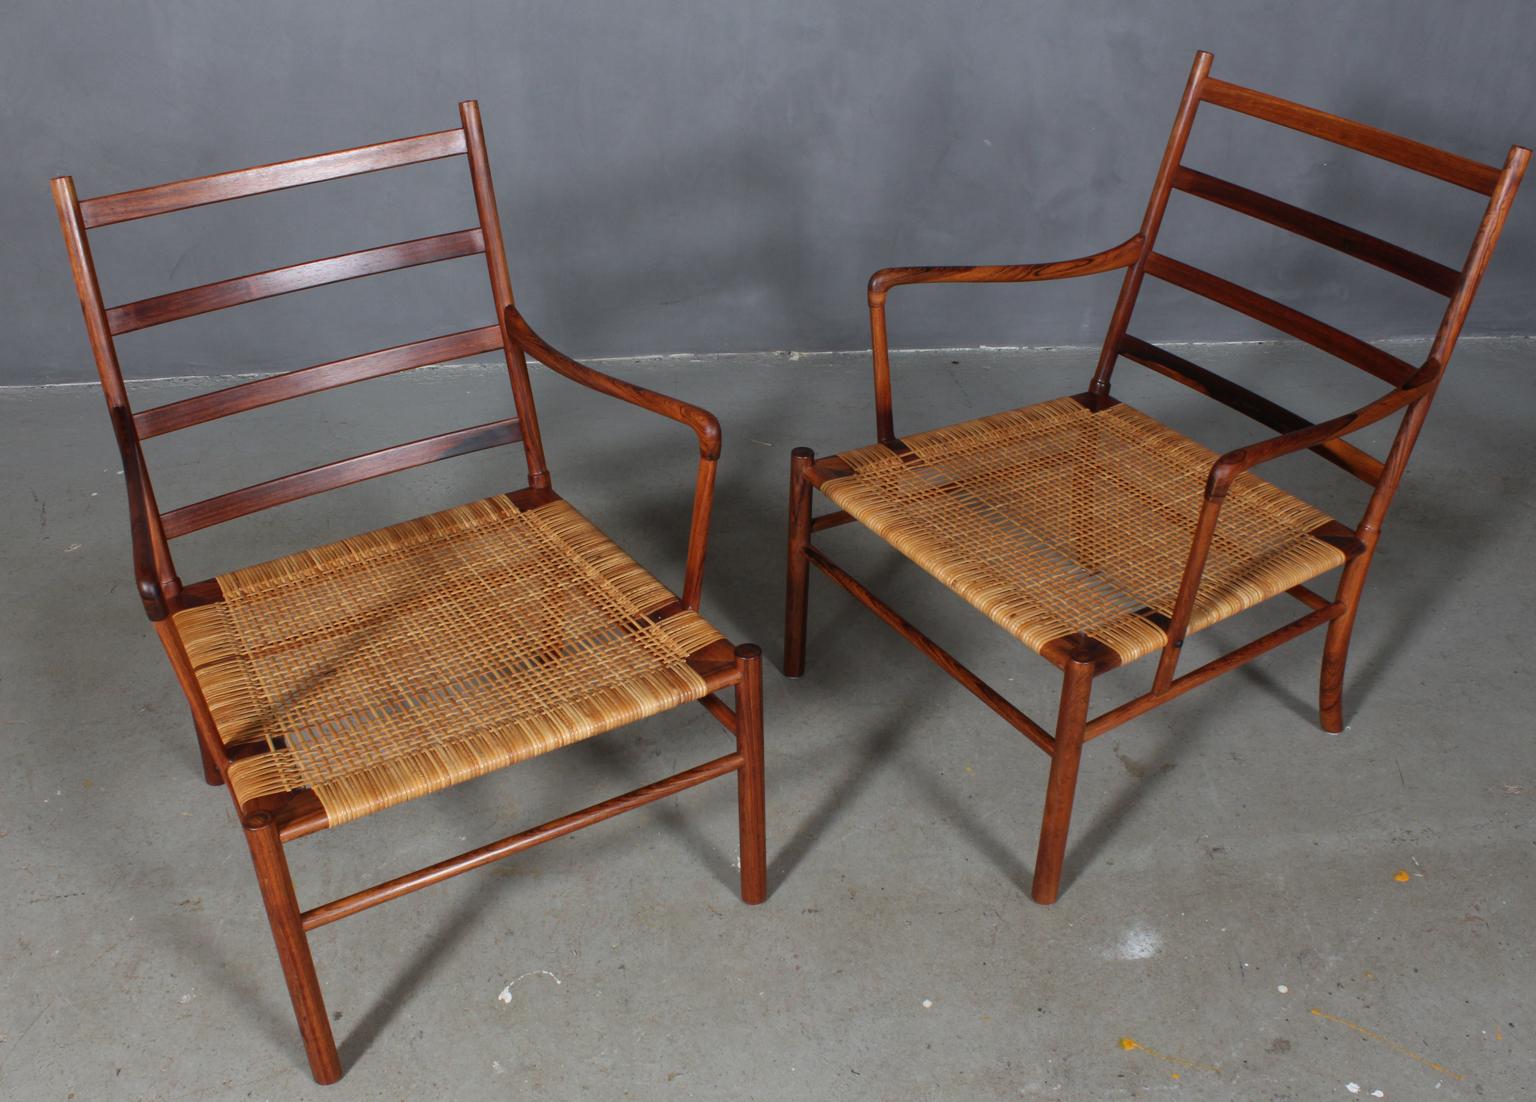 Ole Wanscher

Set of PJ-149 colonial chairs, 1949

The colonial chair is one of Wanscher’s best loved and most iconic designs, drawing influence from British and French Colonial furniture of the 18th-19th centuries. Produced by Poul Jeppesen,